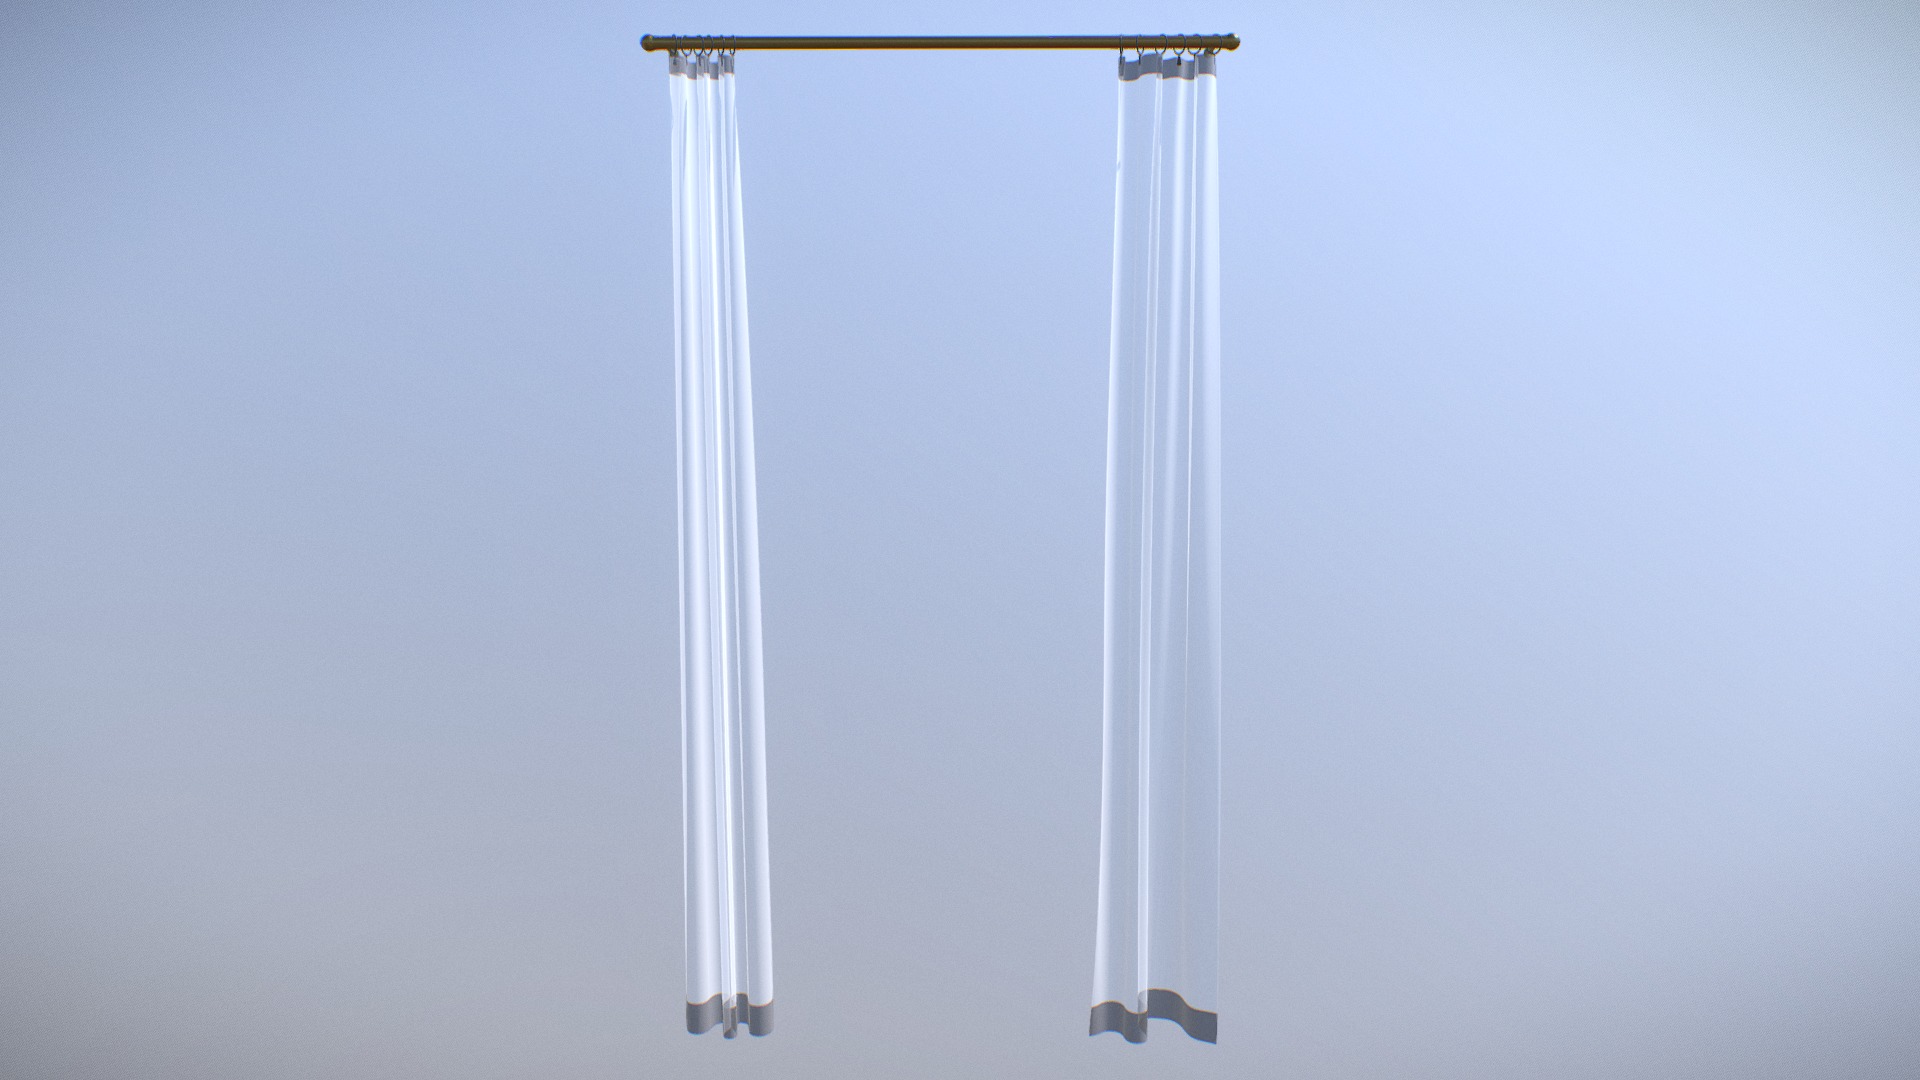 3D model Open Curtains - This is a 3D model of the Open Curtains. The 3D model is about a white pole with a metal rod.